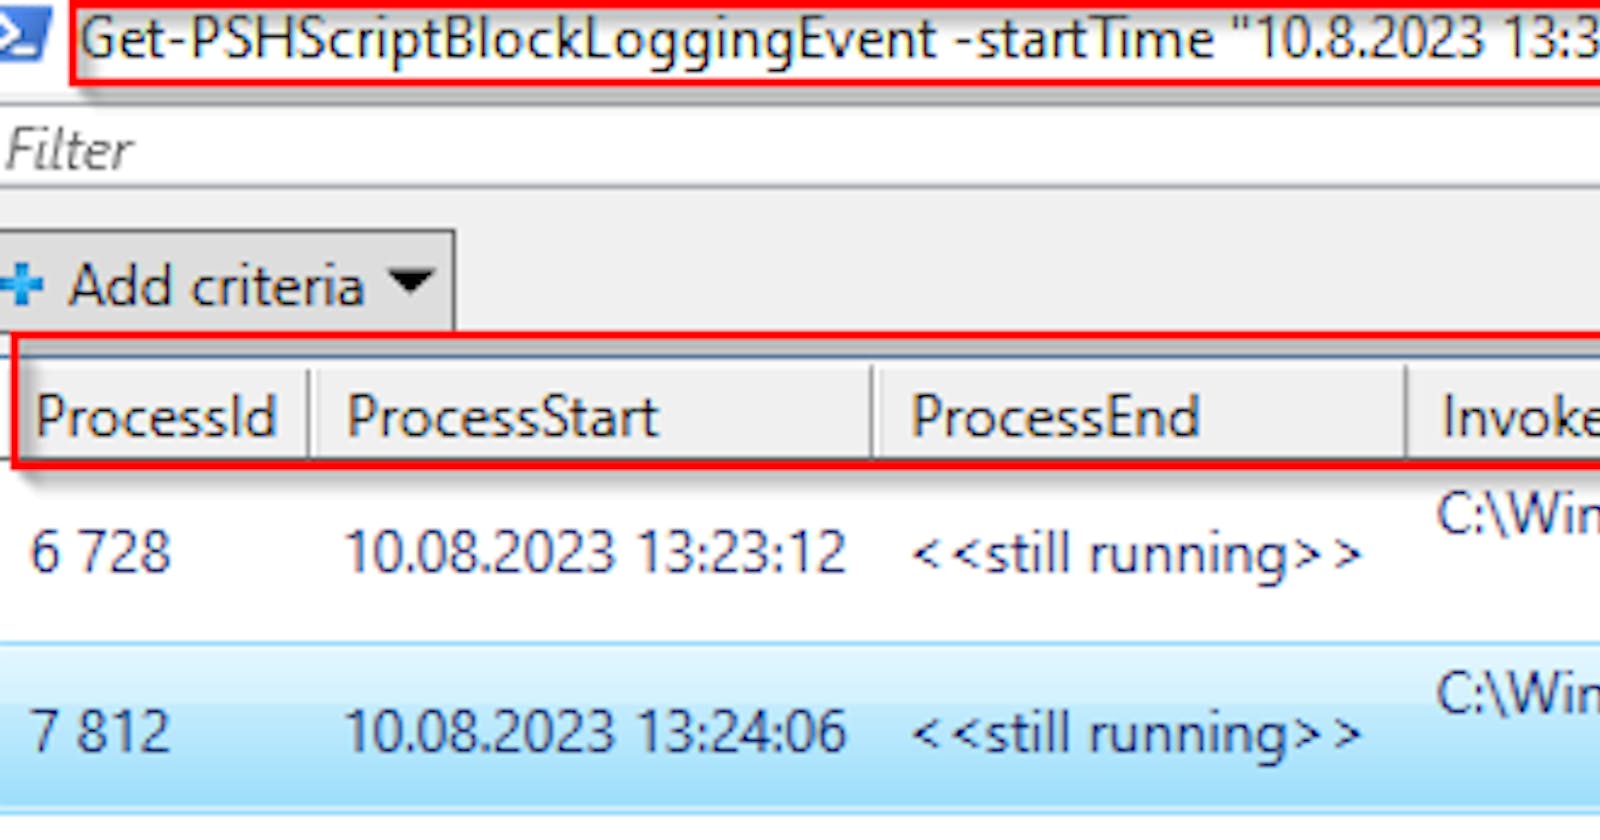 Getting PowerShell Script Block Logging events with context like who, when, and how  run the code